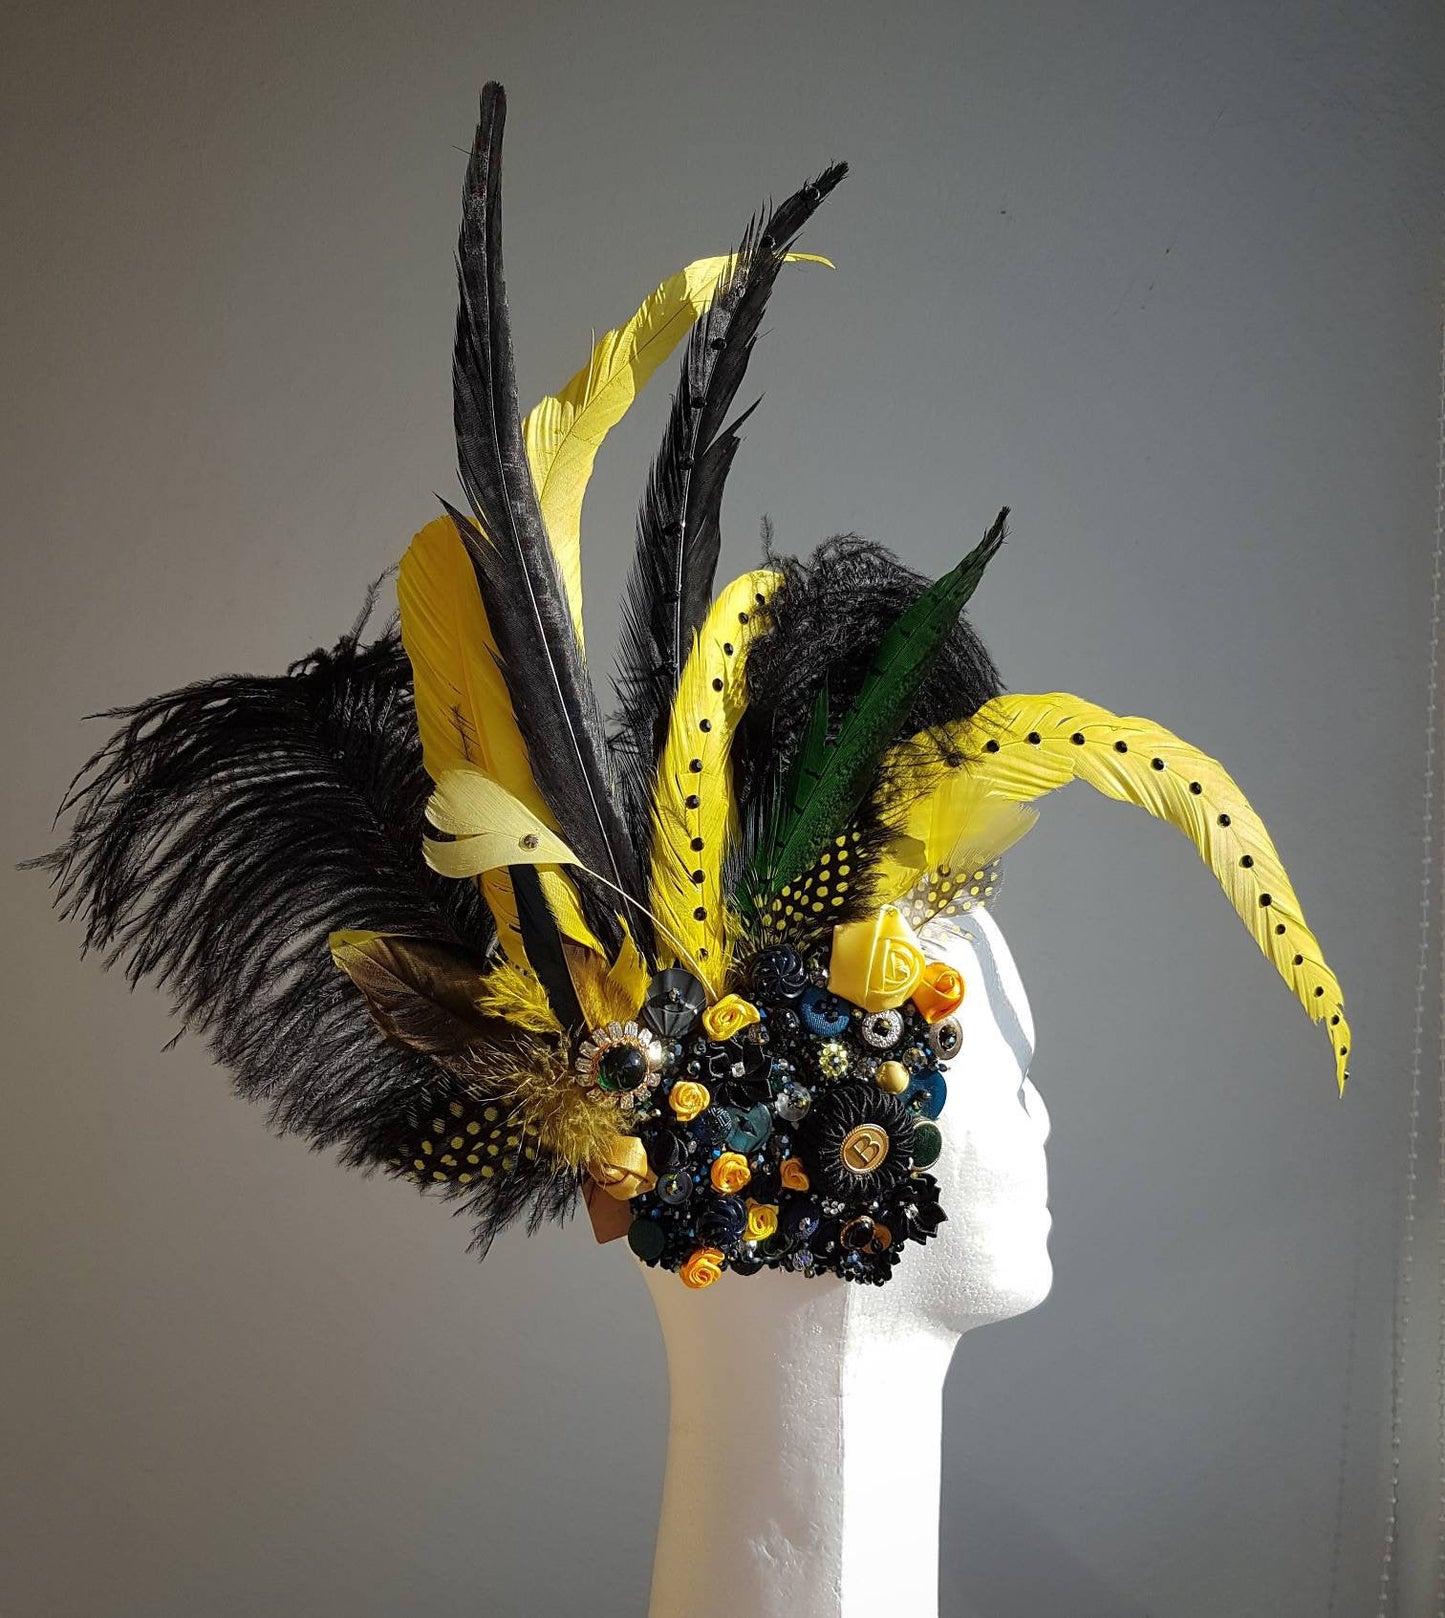 Harlequin Collection: The Harlequin Songbird hair ornament